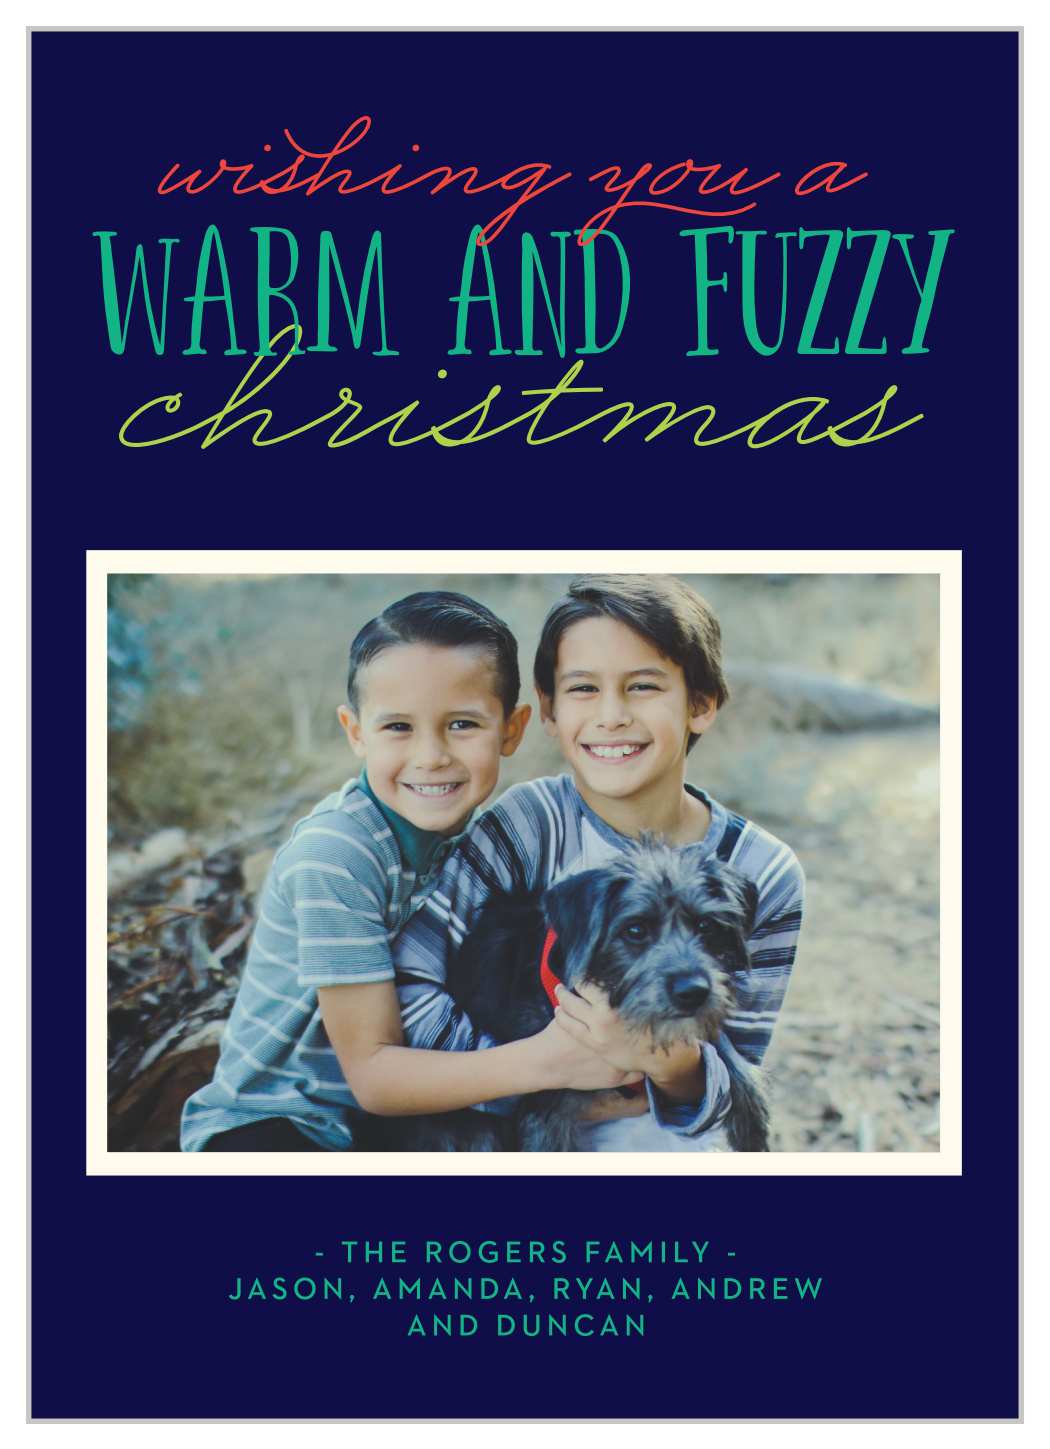 Fuzzy Pup Christmas Cards